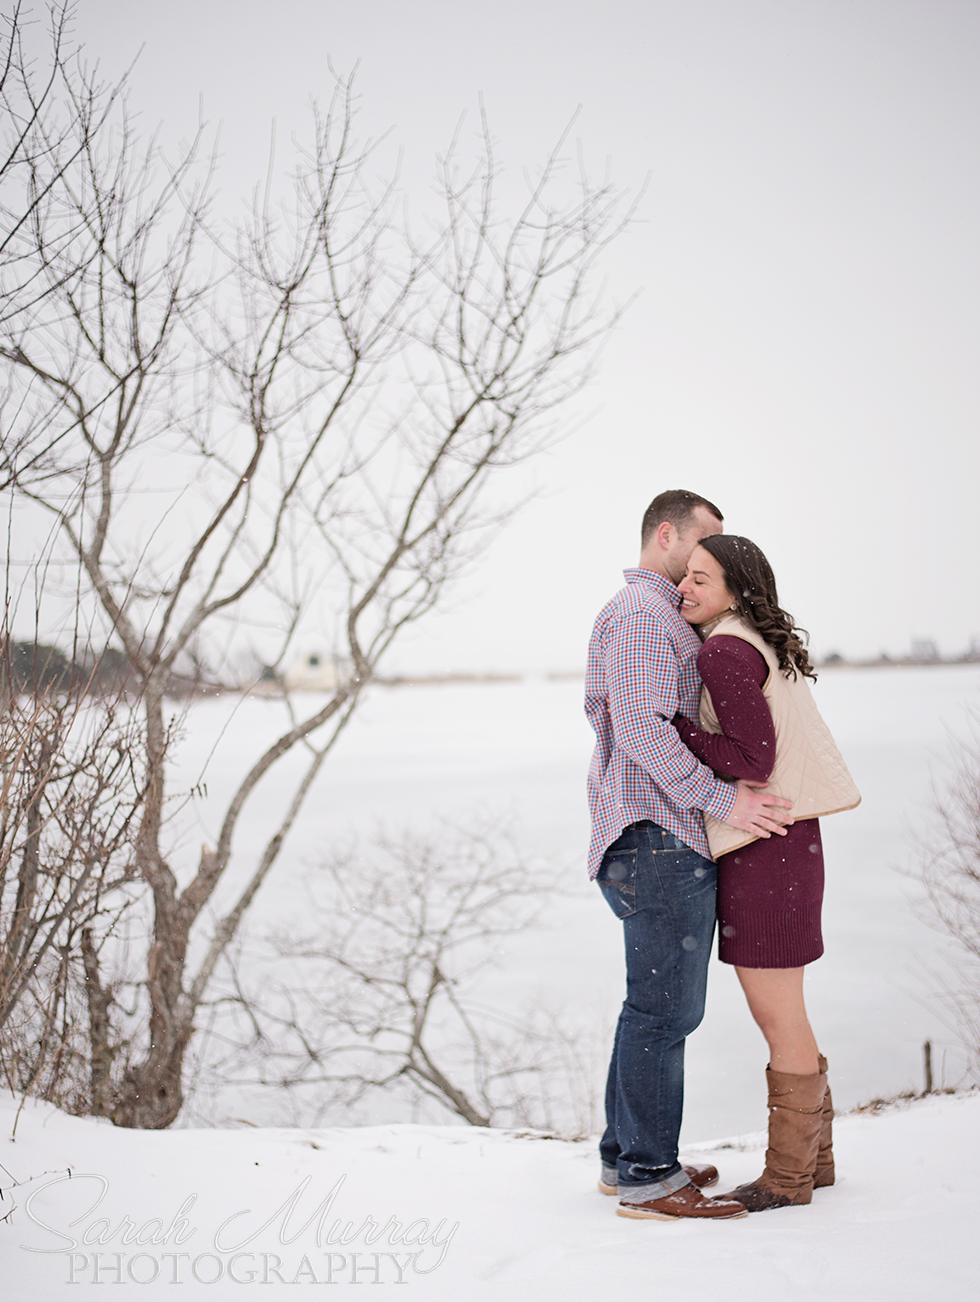 Cape Cod Beach Engagement Session in Falmouth, Massachusetts - Sarah Murray Photography